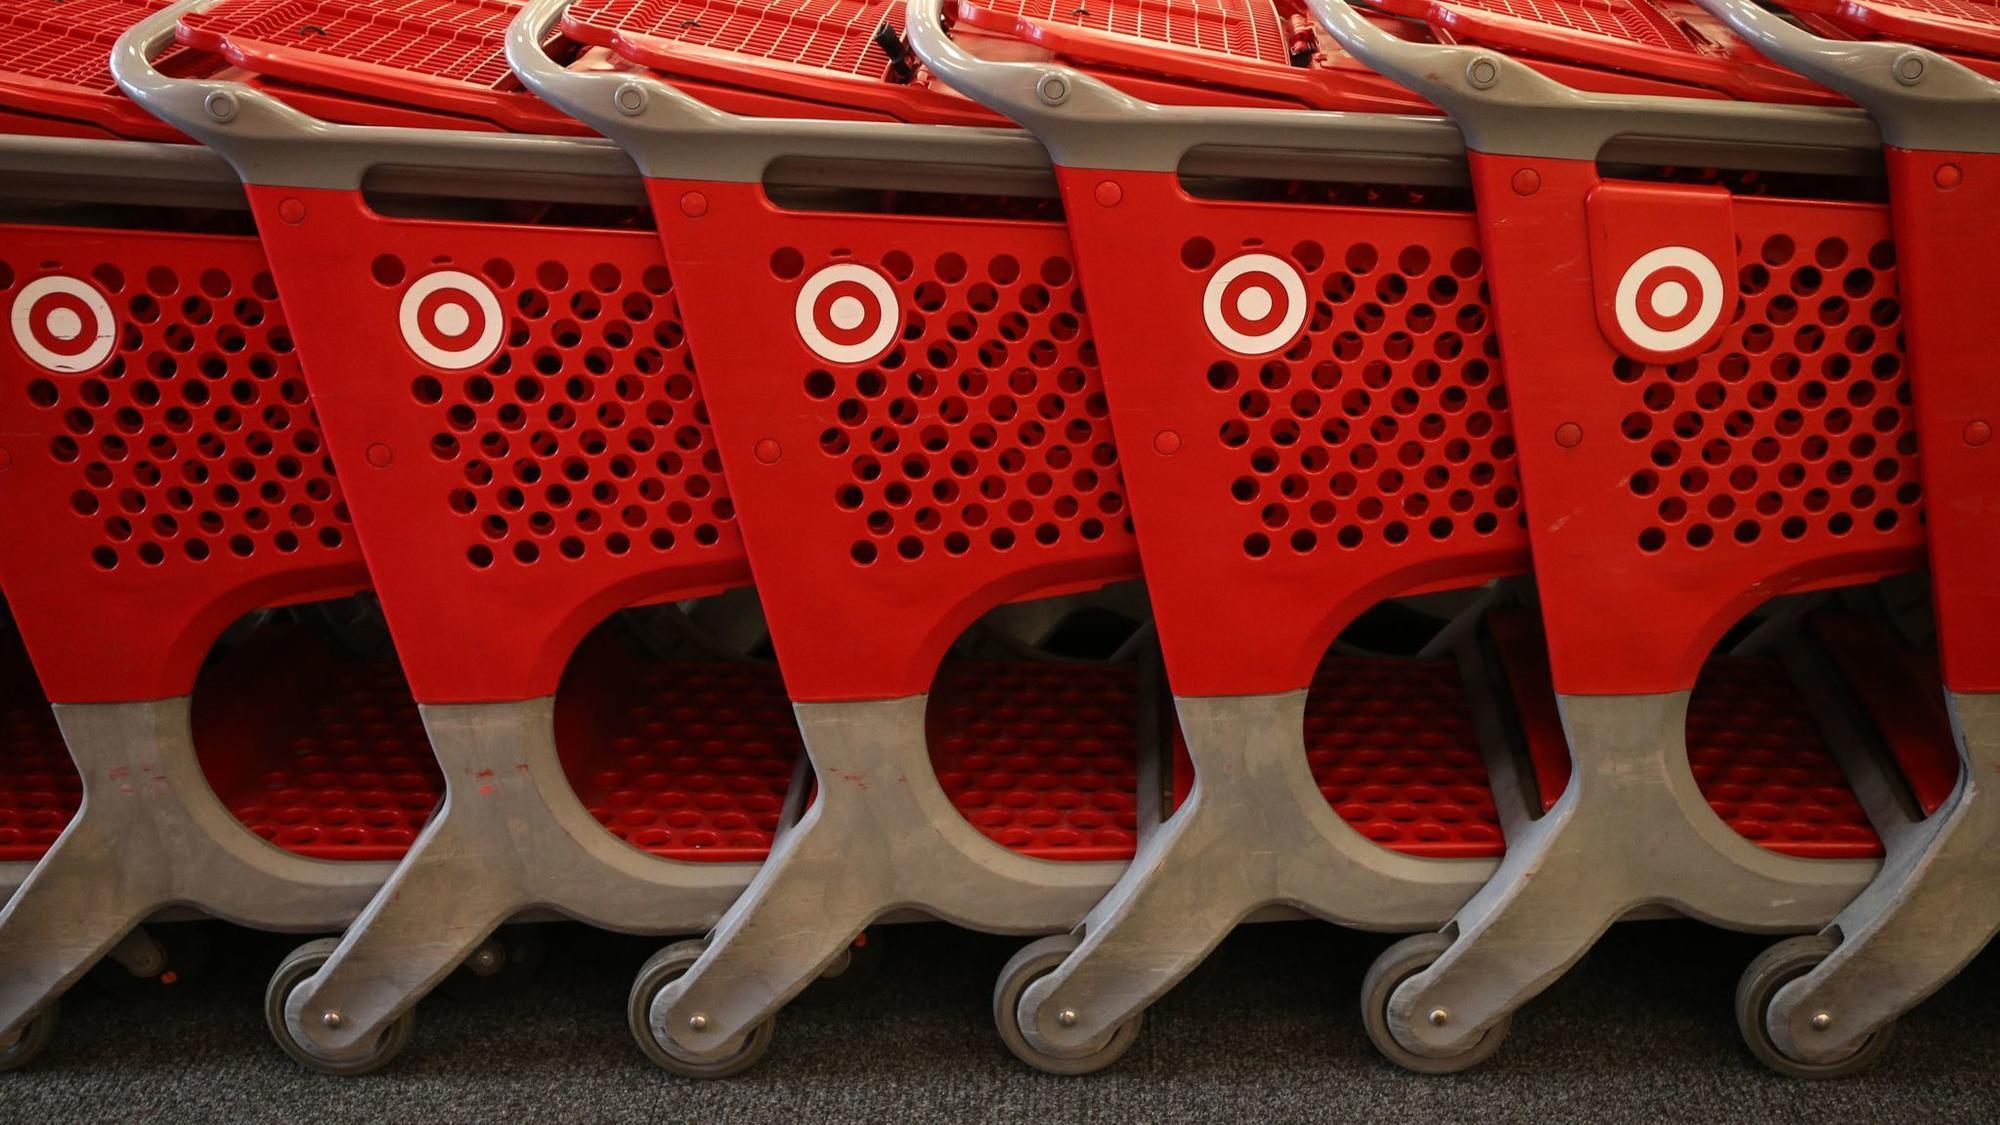 Target to close two South Side stores in February - Chicago Tribune